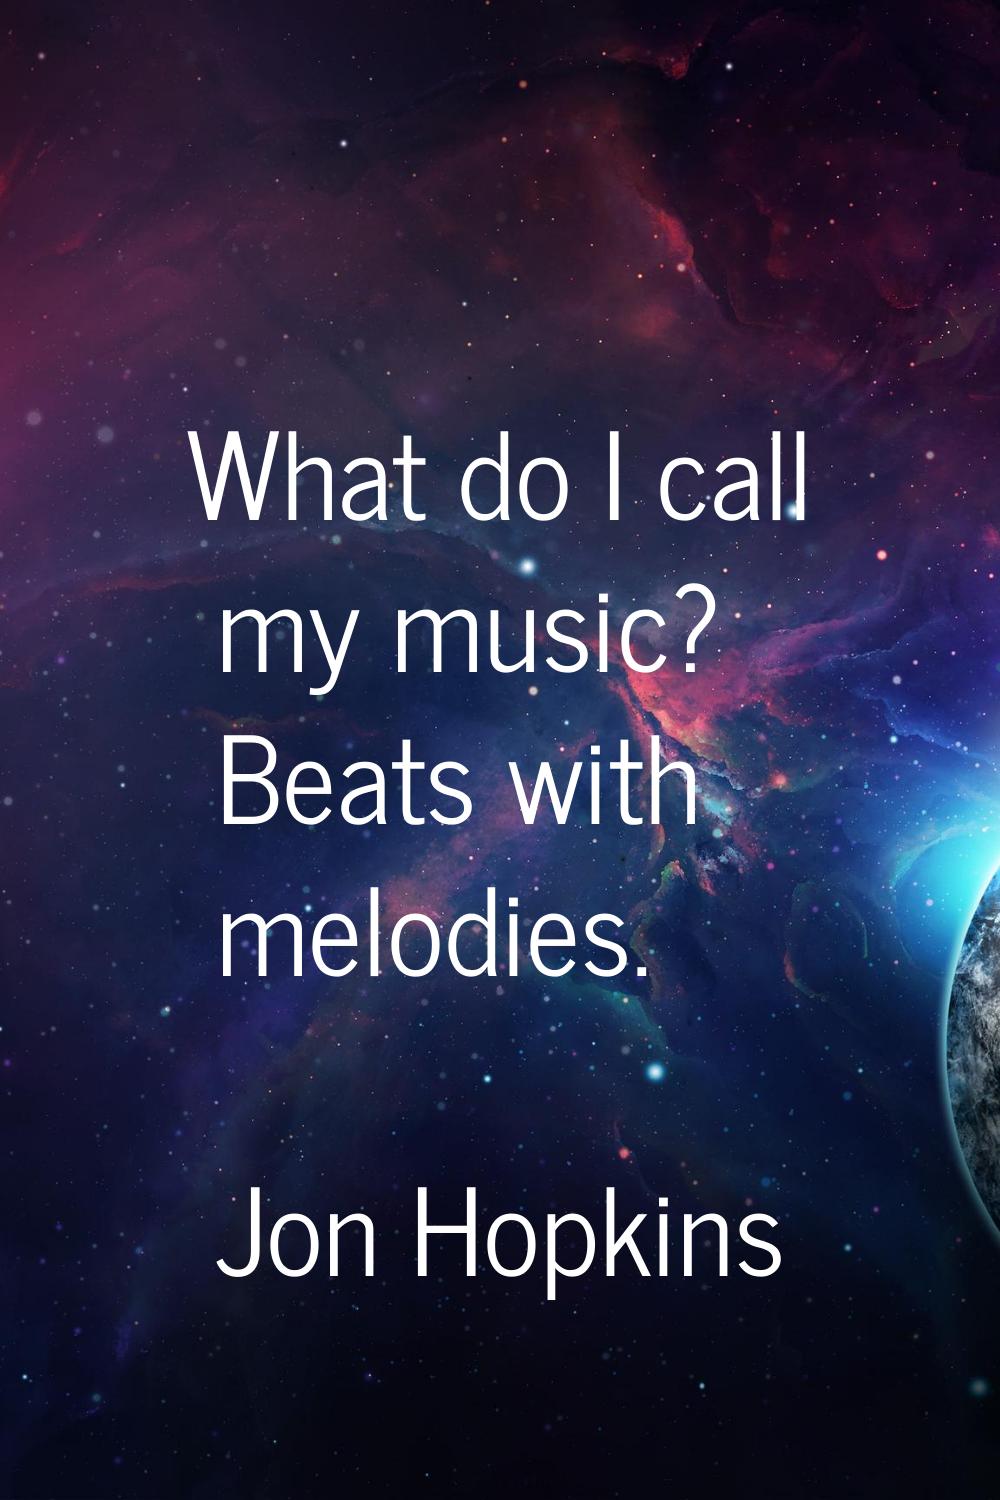 What do I call my music? Beats with melodies.